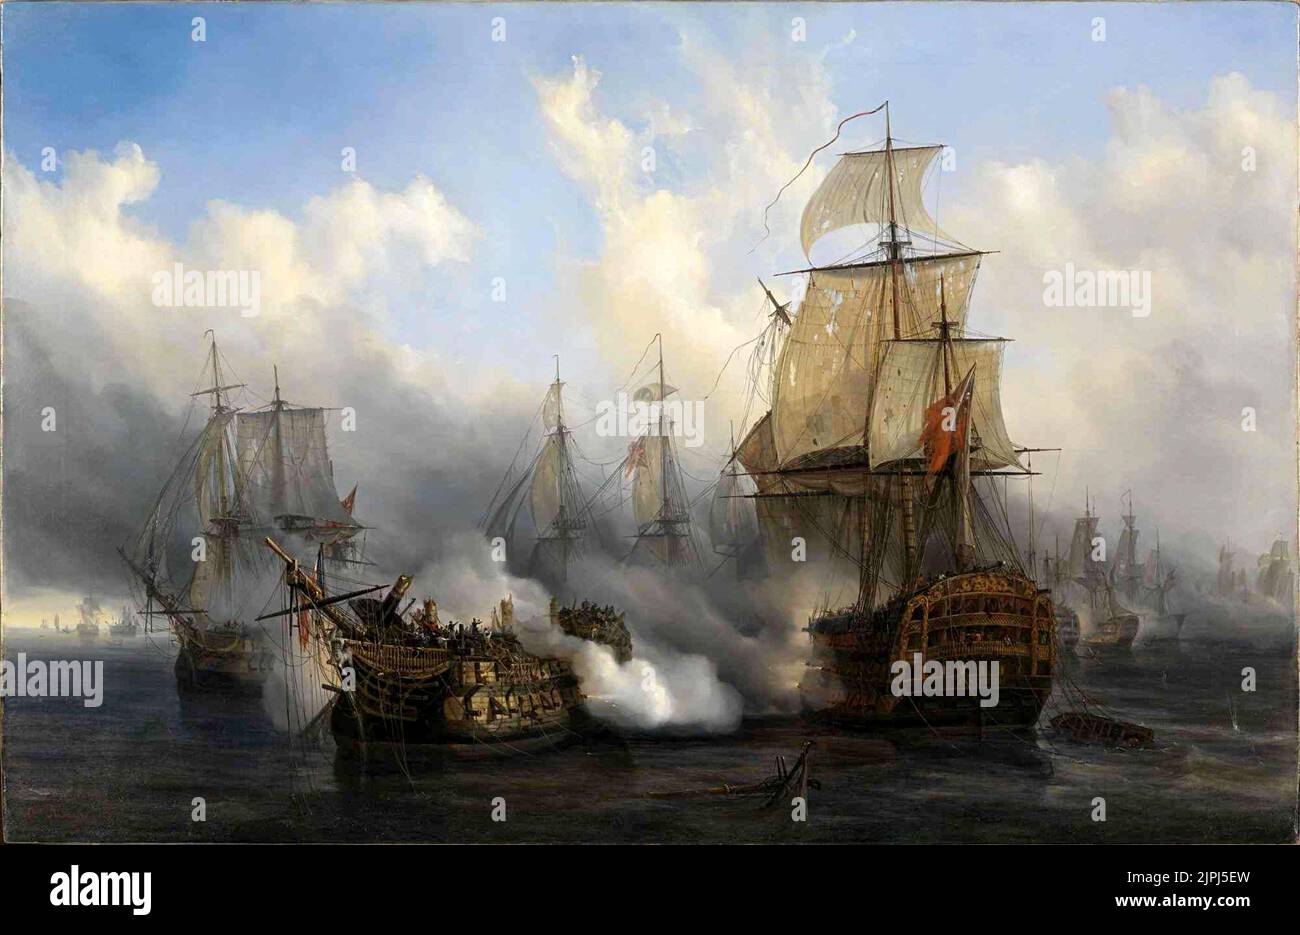 The British HMS Sandwich fires at the French flagship Bucentaure (completely dismasted) in the battle of Trafalgar. Bucentaure also fights HMS Victory (behind her) and HMS Temeraire (left side of the picture). HMS Sandwich did not fight at Trafalgar and her depiction is a mistake by the painter. By Auguste Étienne François Mayer Stock Photo